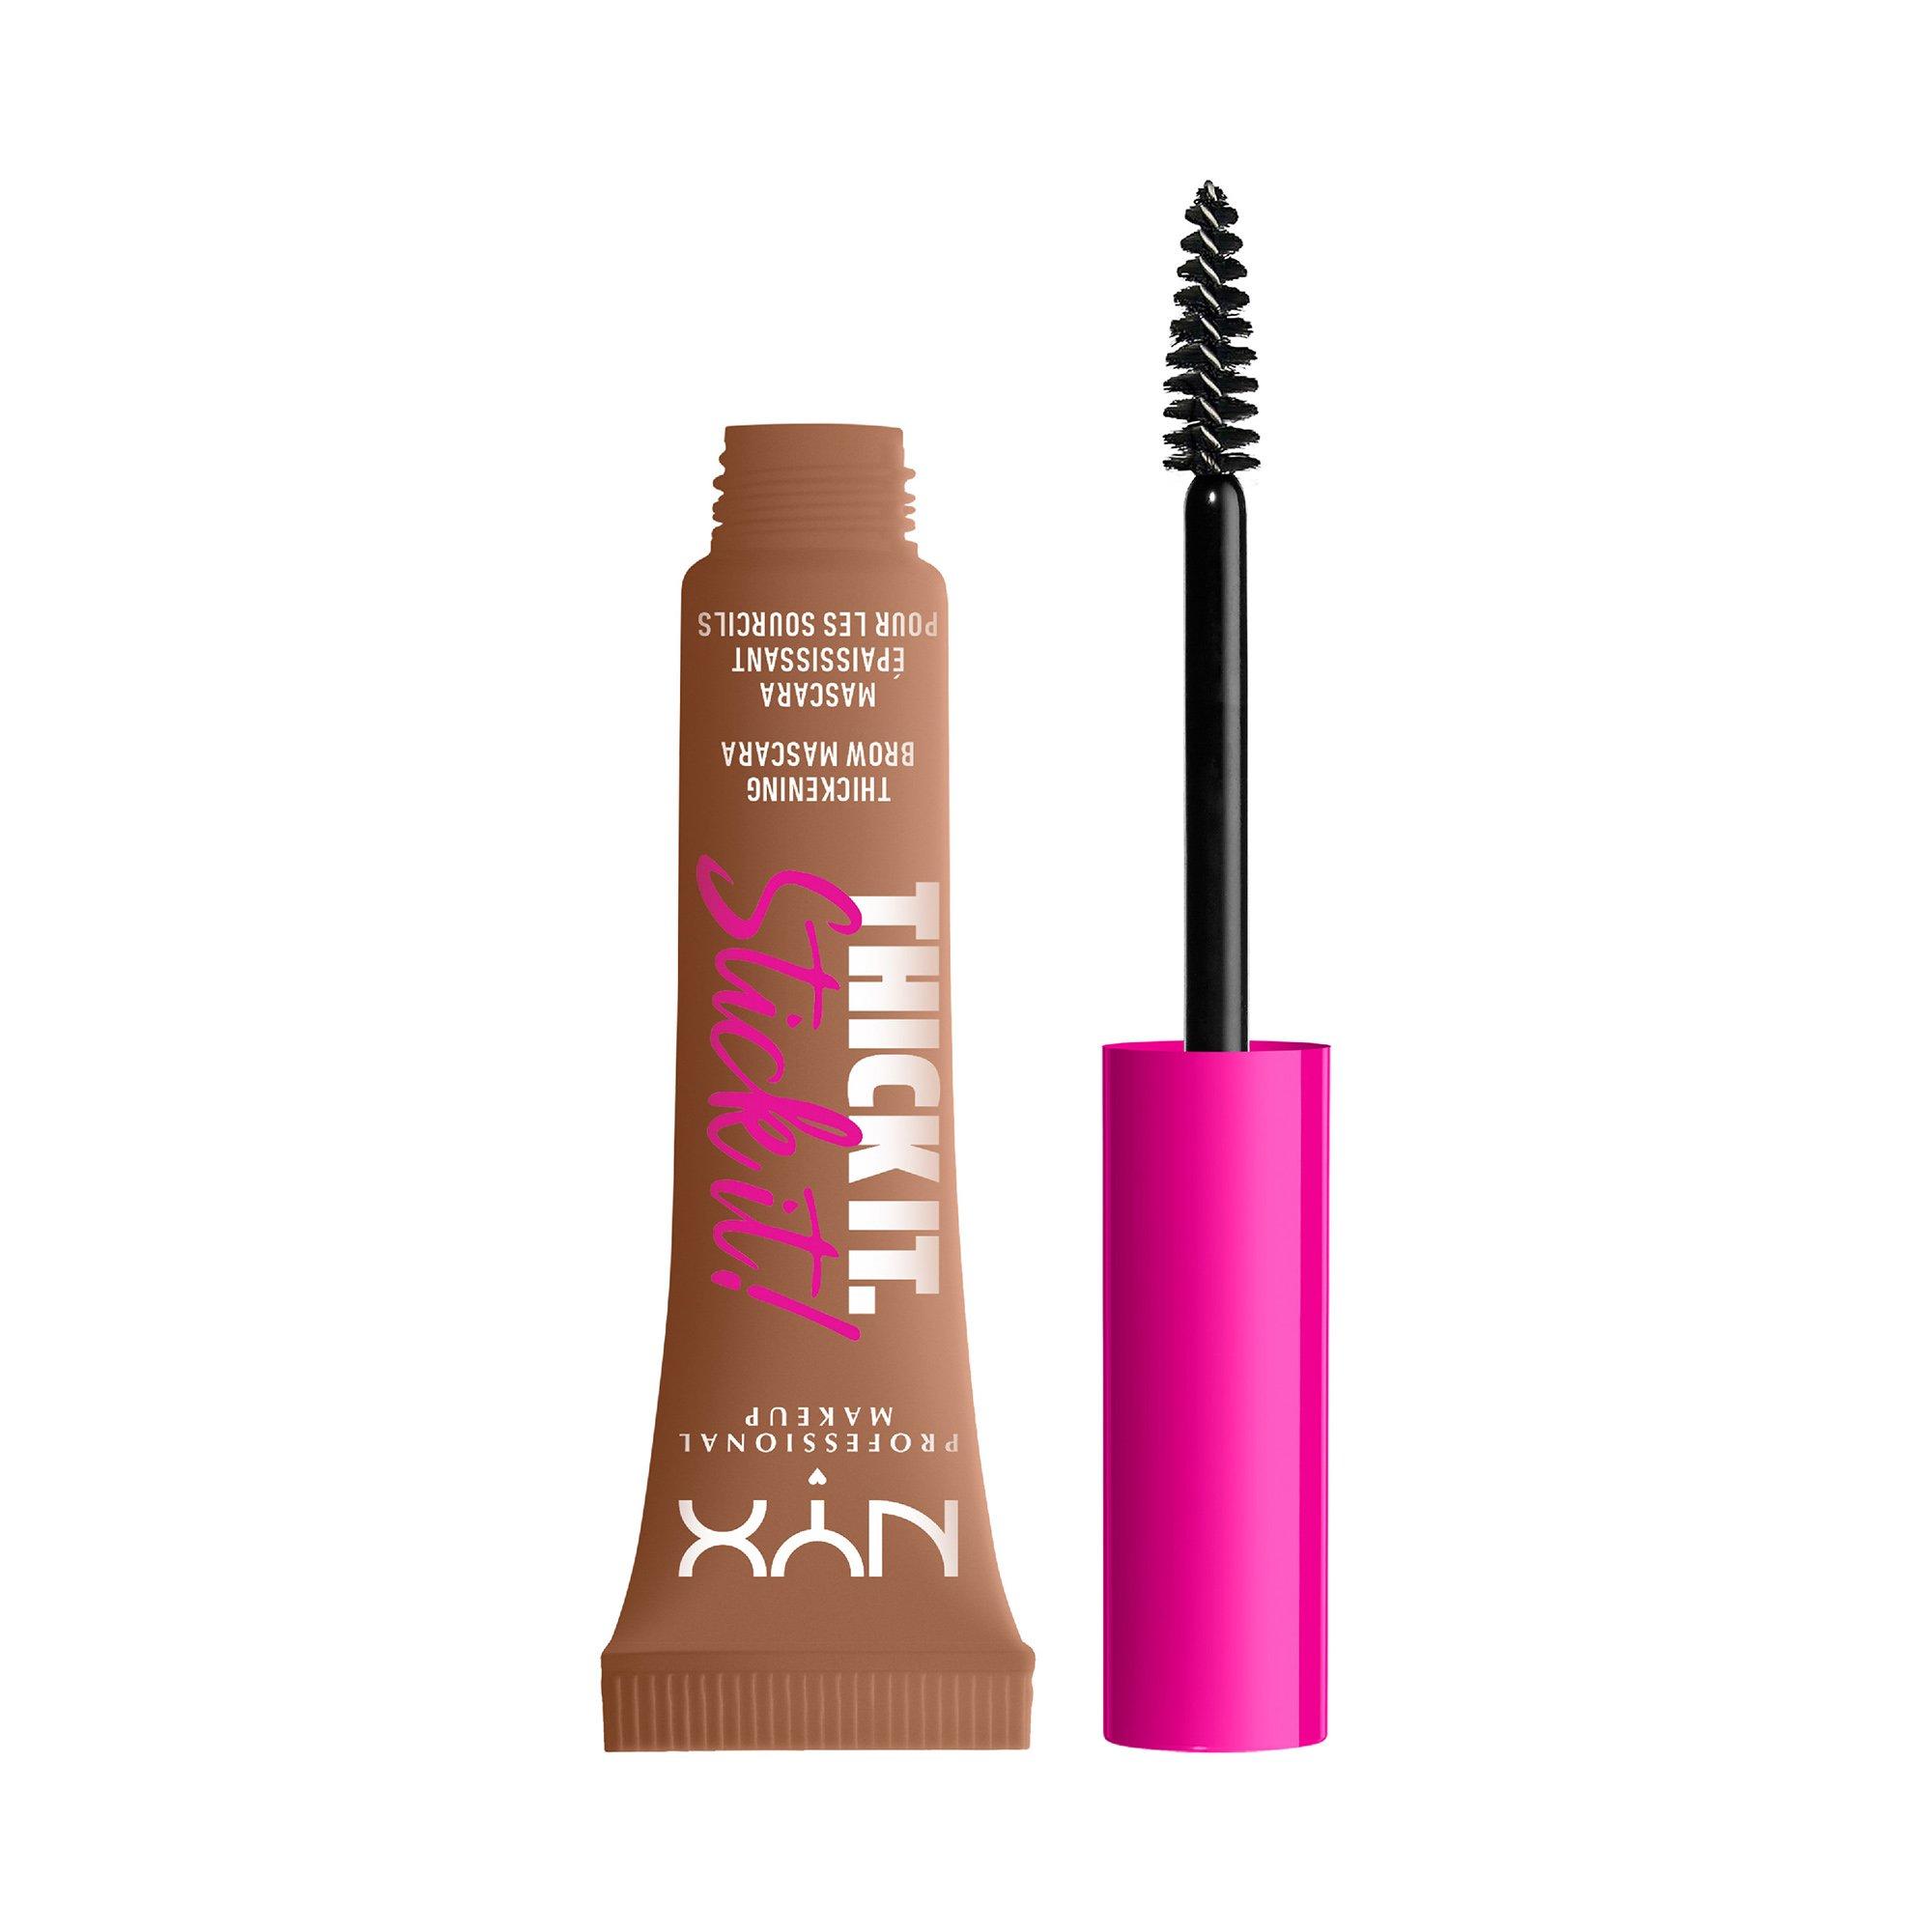 Image of NYX-PROFESSIONAL-MAKEUP THICK IT STICK IT BROW MASCARA Thick it. Stick it! Brow Mascara - 7ml